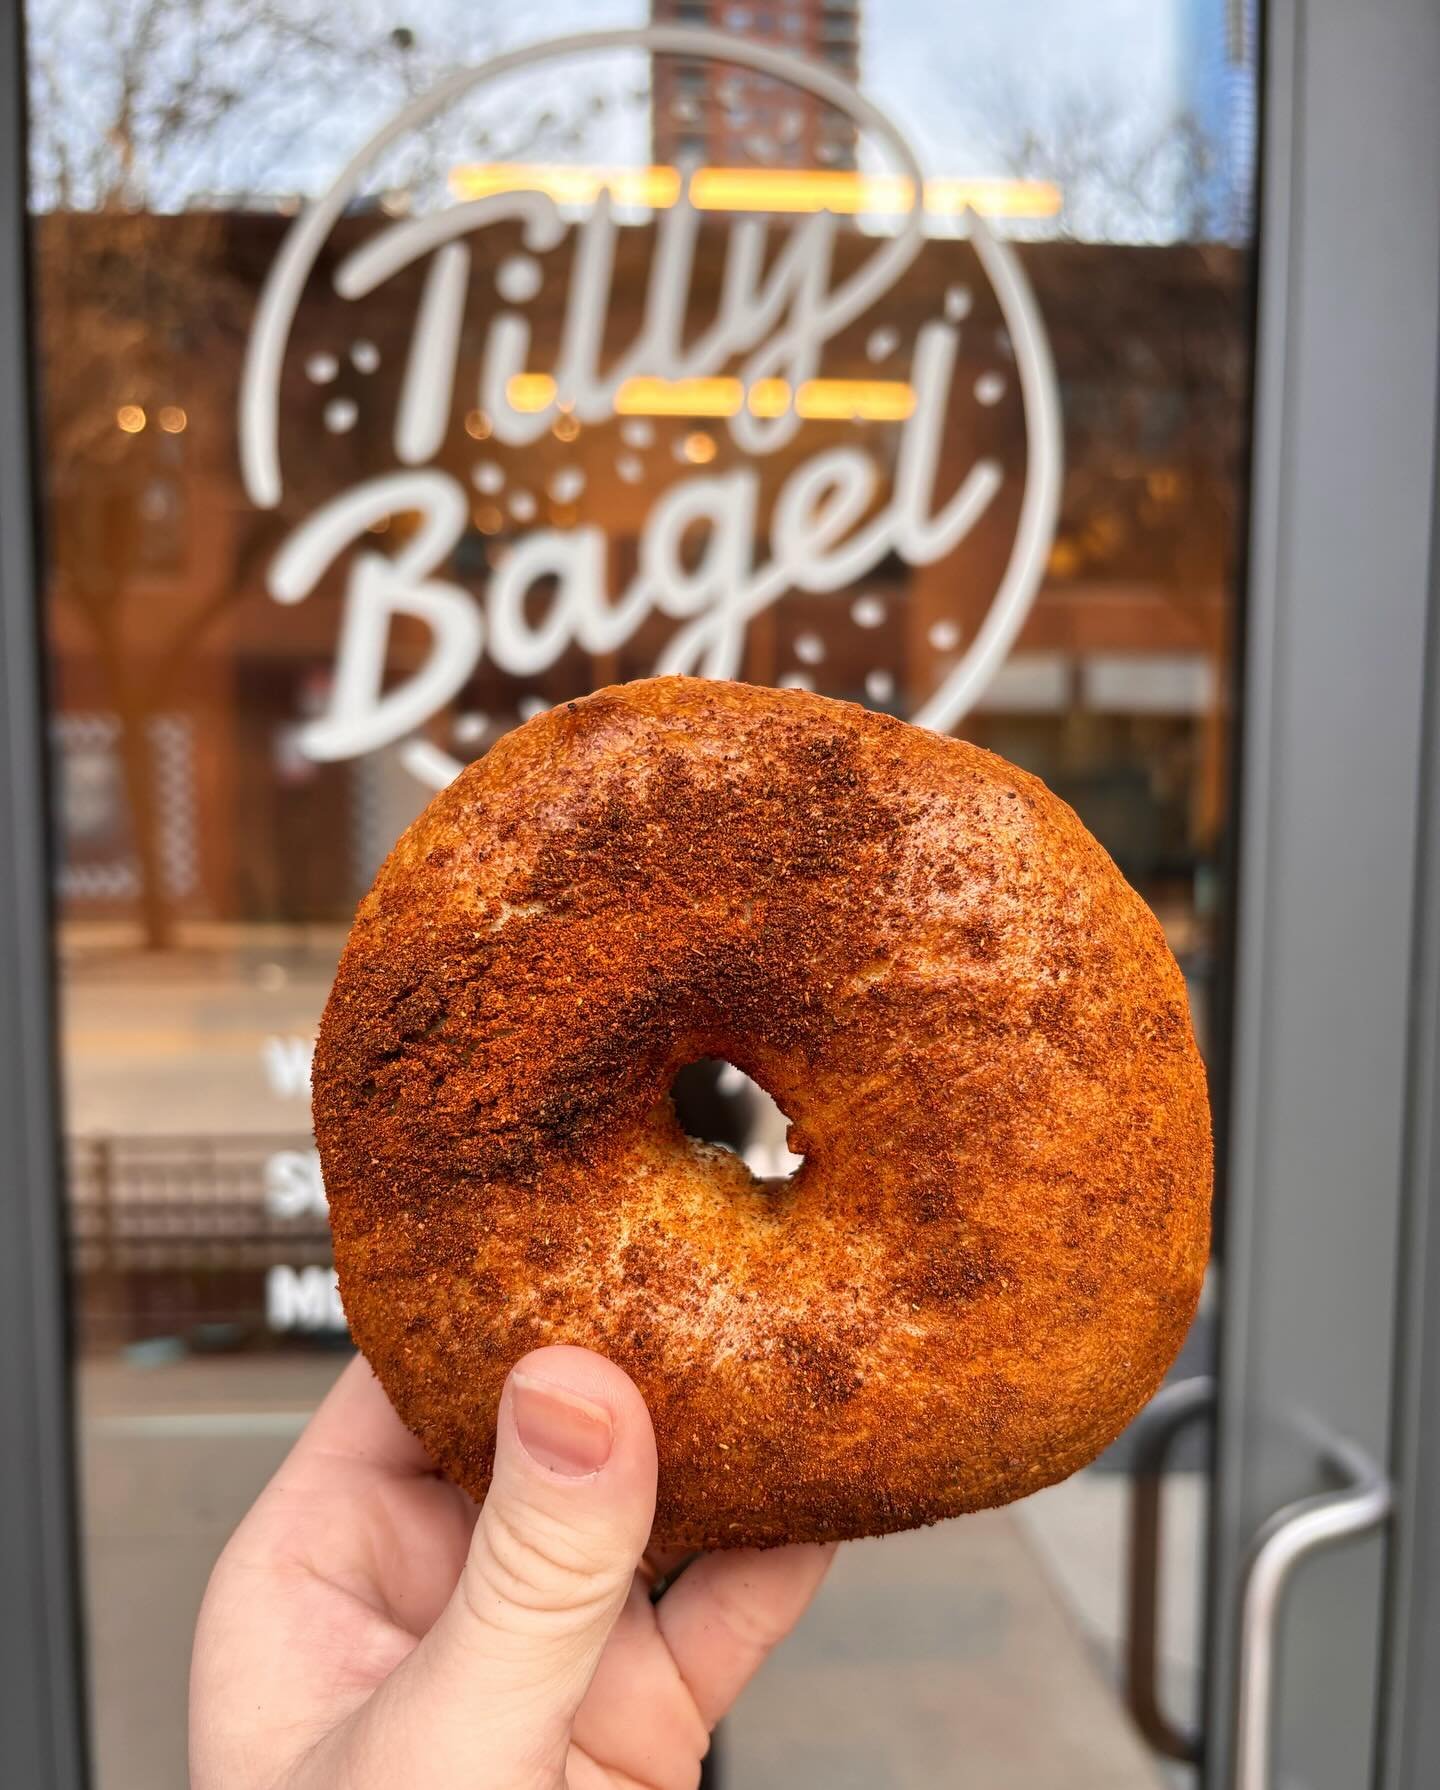 Getting prepared for summer with our BBQ Bagel of the Week! 😎☀️🥯 Packed with hickory-smoked flavor, garlic, smoked paprika, and sea salt!